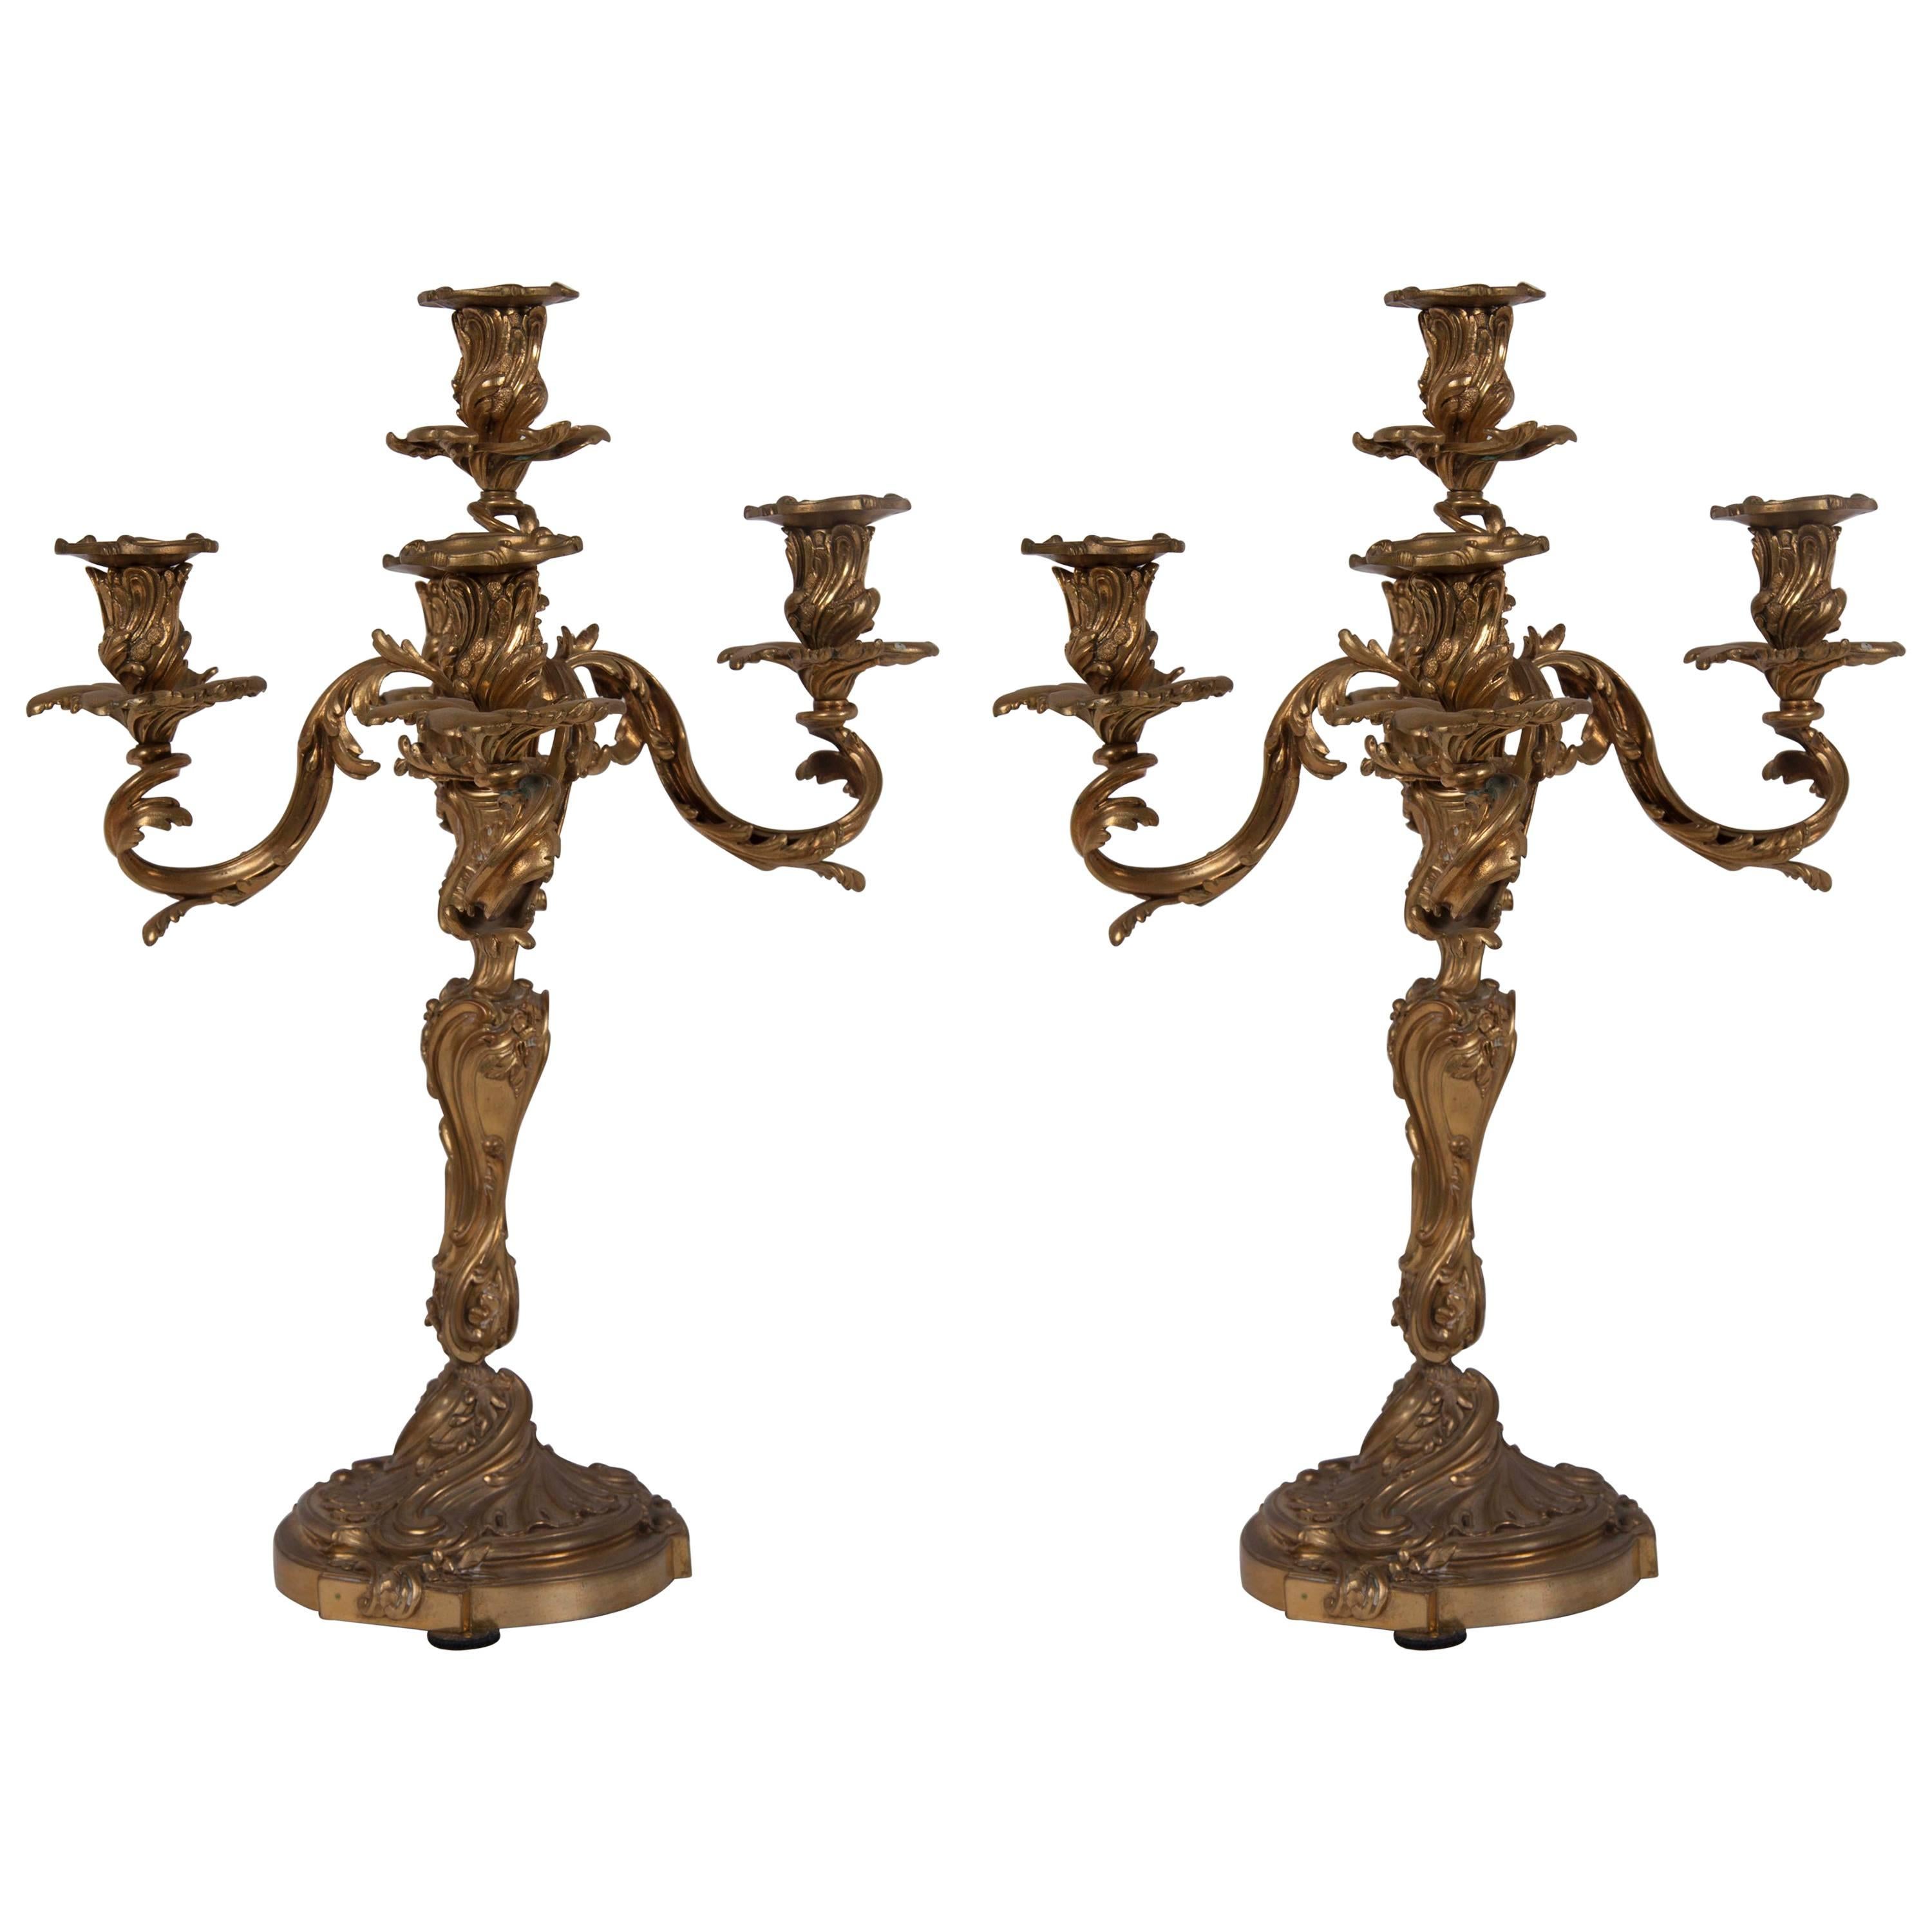 Pair of French Bronze Candelabra, Late 19th Century